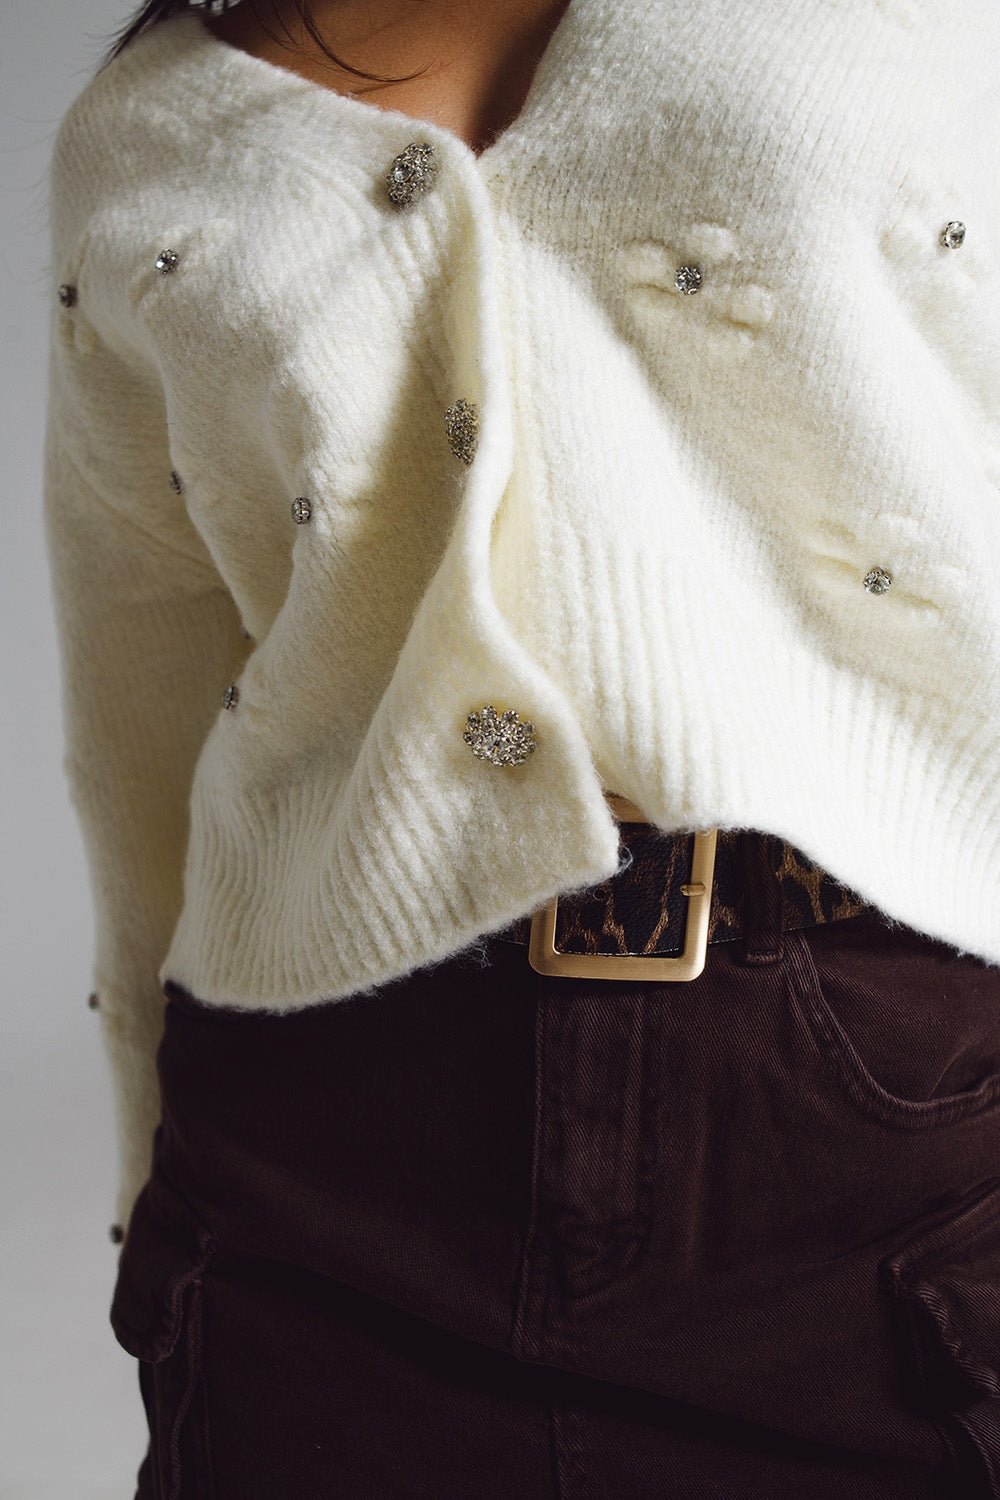 Cream Cardigan With Knitted Flowers and Embellished Details - Mack & Harvie